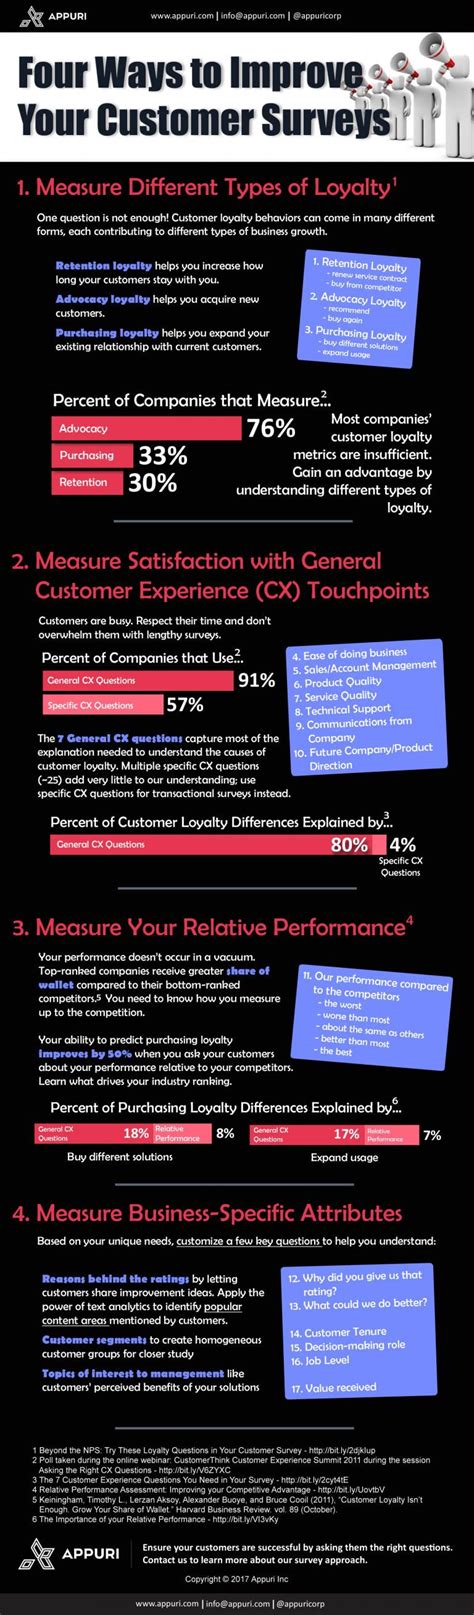 How To Improve Your Customer Surveys Infographic Smart Insights